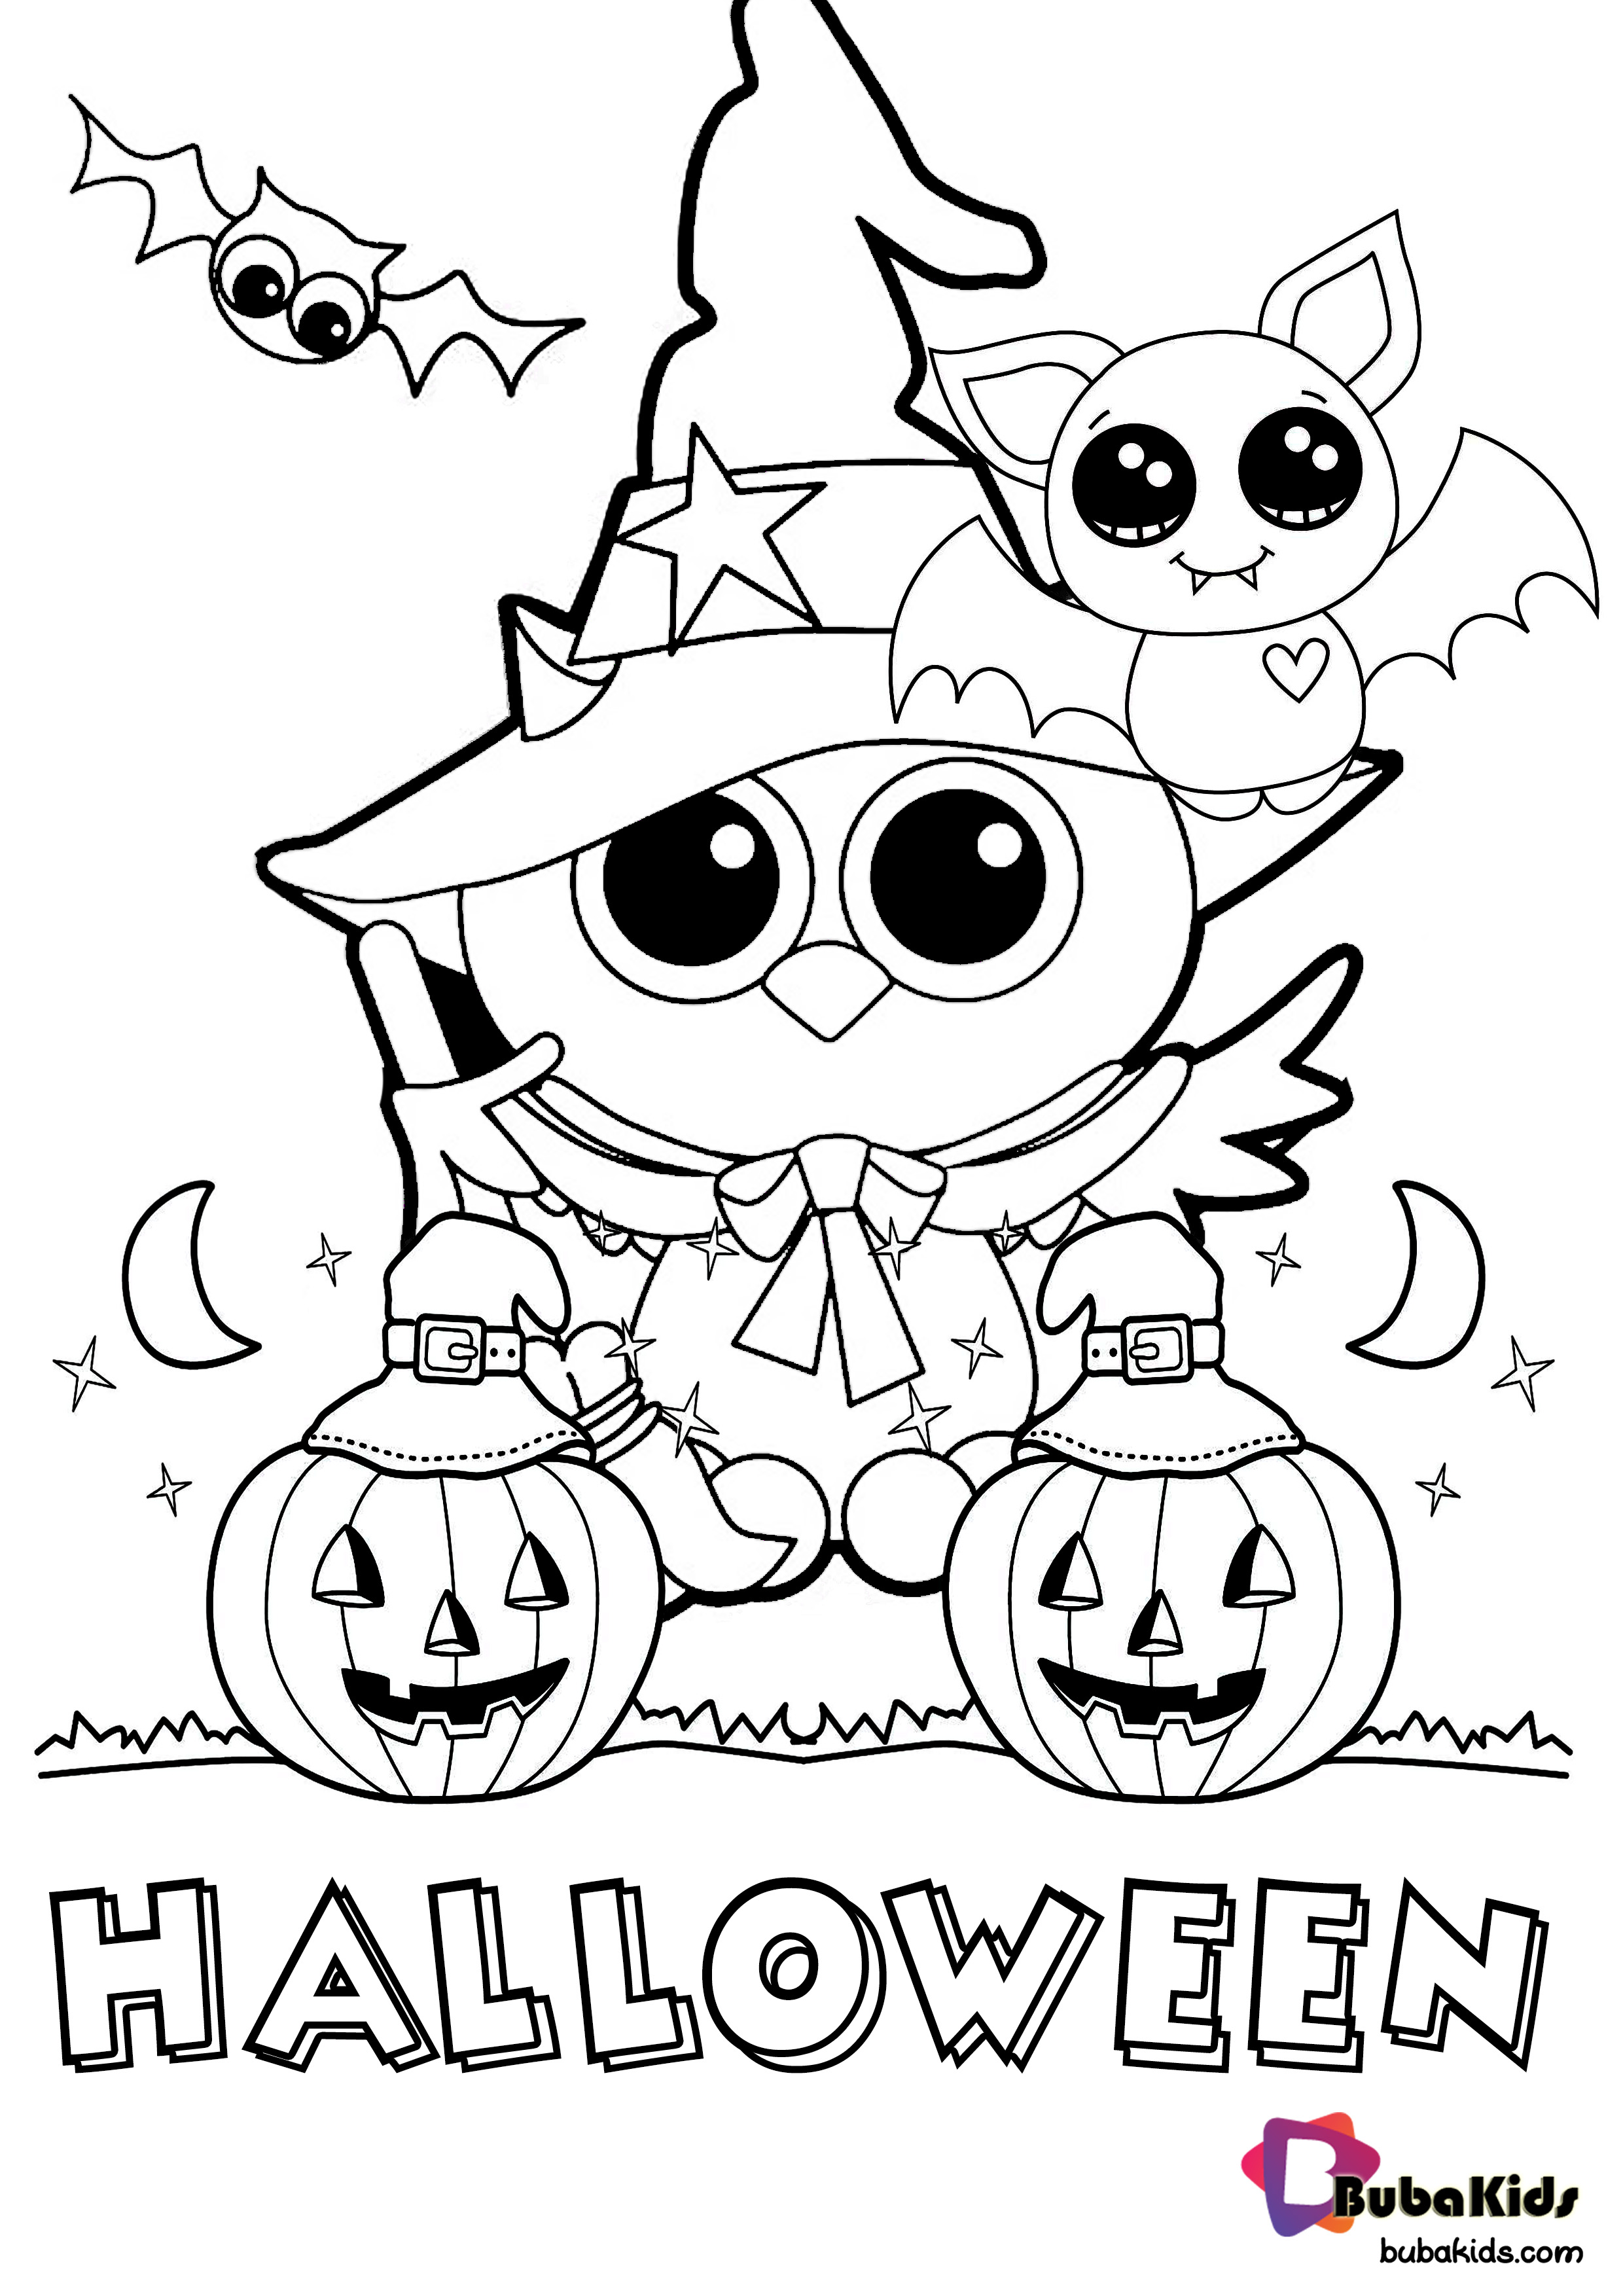 Halloween Coloring Pages Printable Free Wallpaper